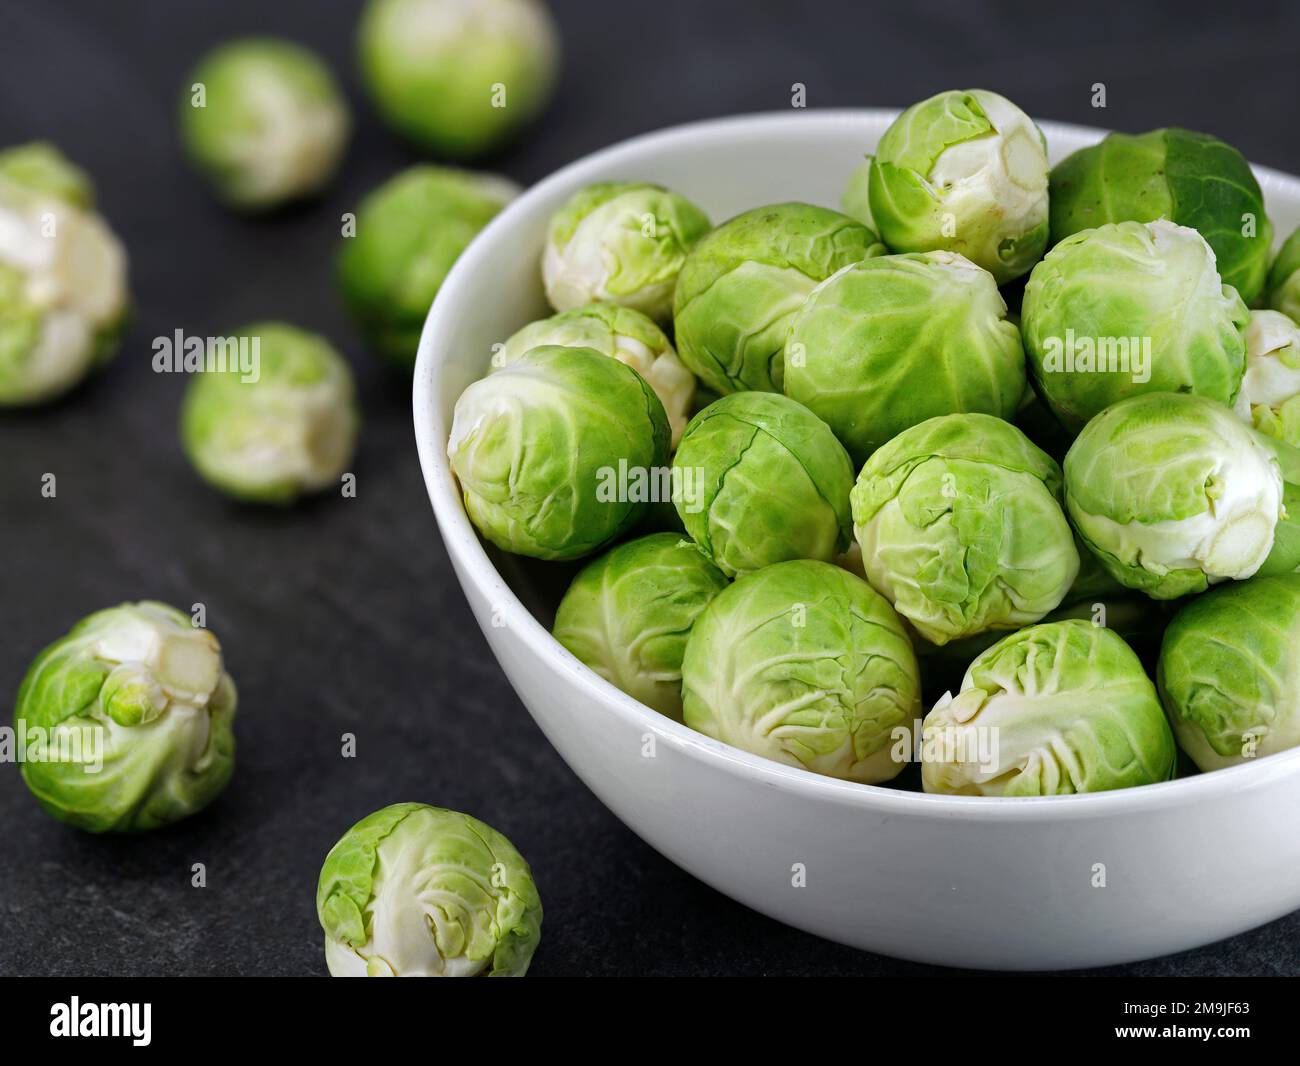 Close up of organic brussel sprouts in a white bowl on black stone background Stock Photo